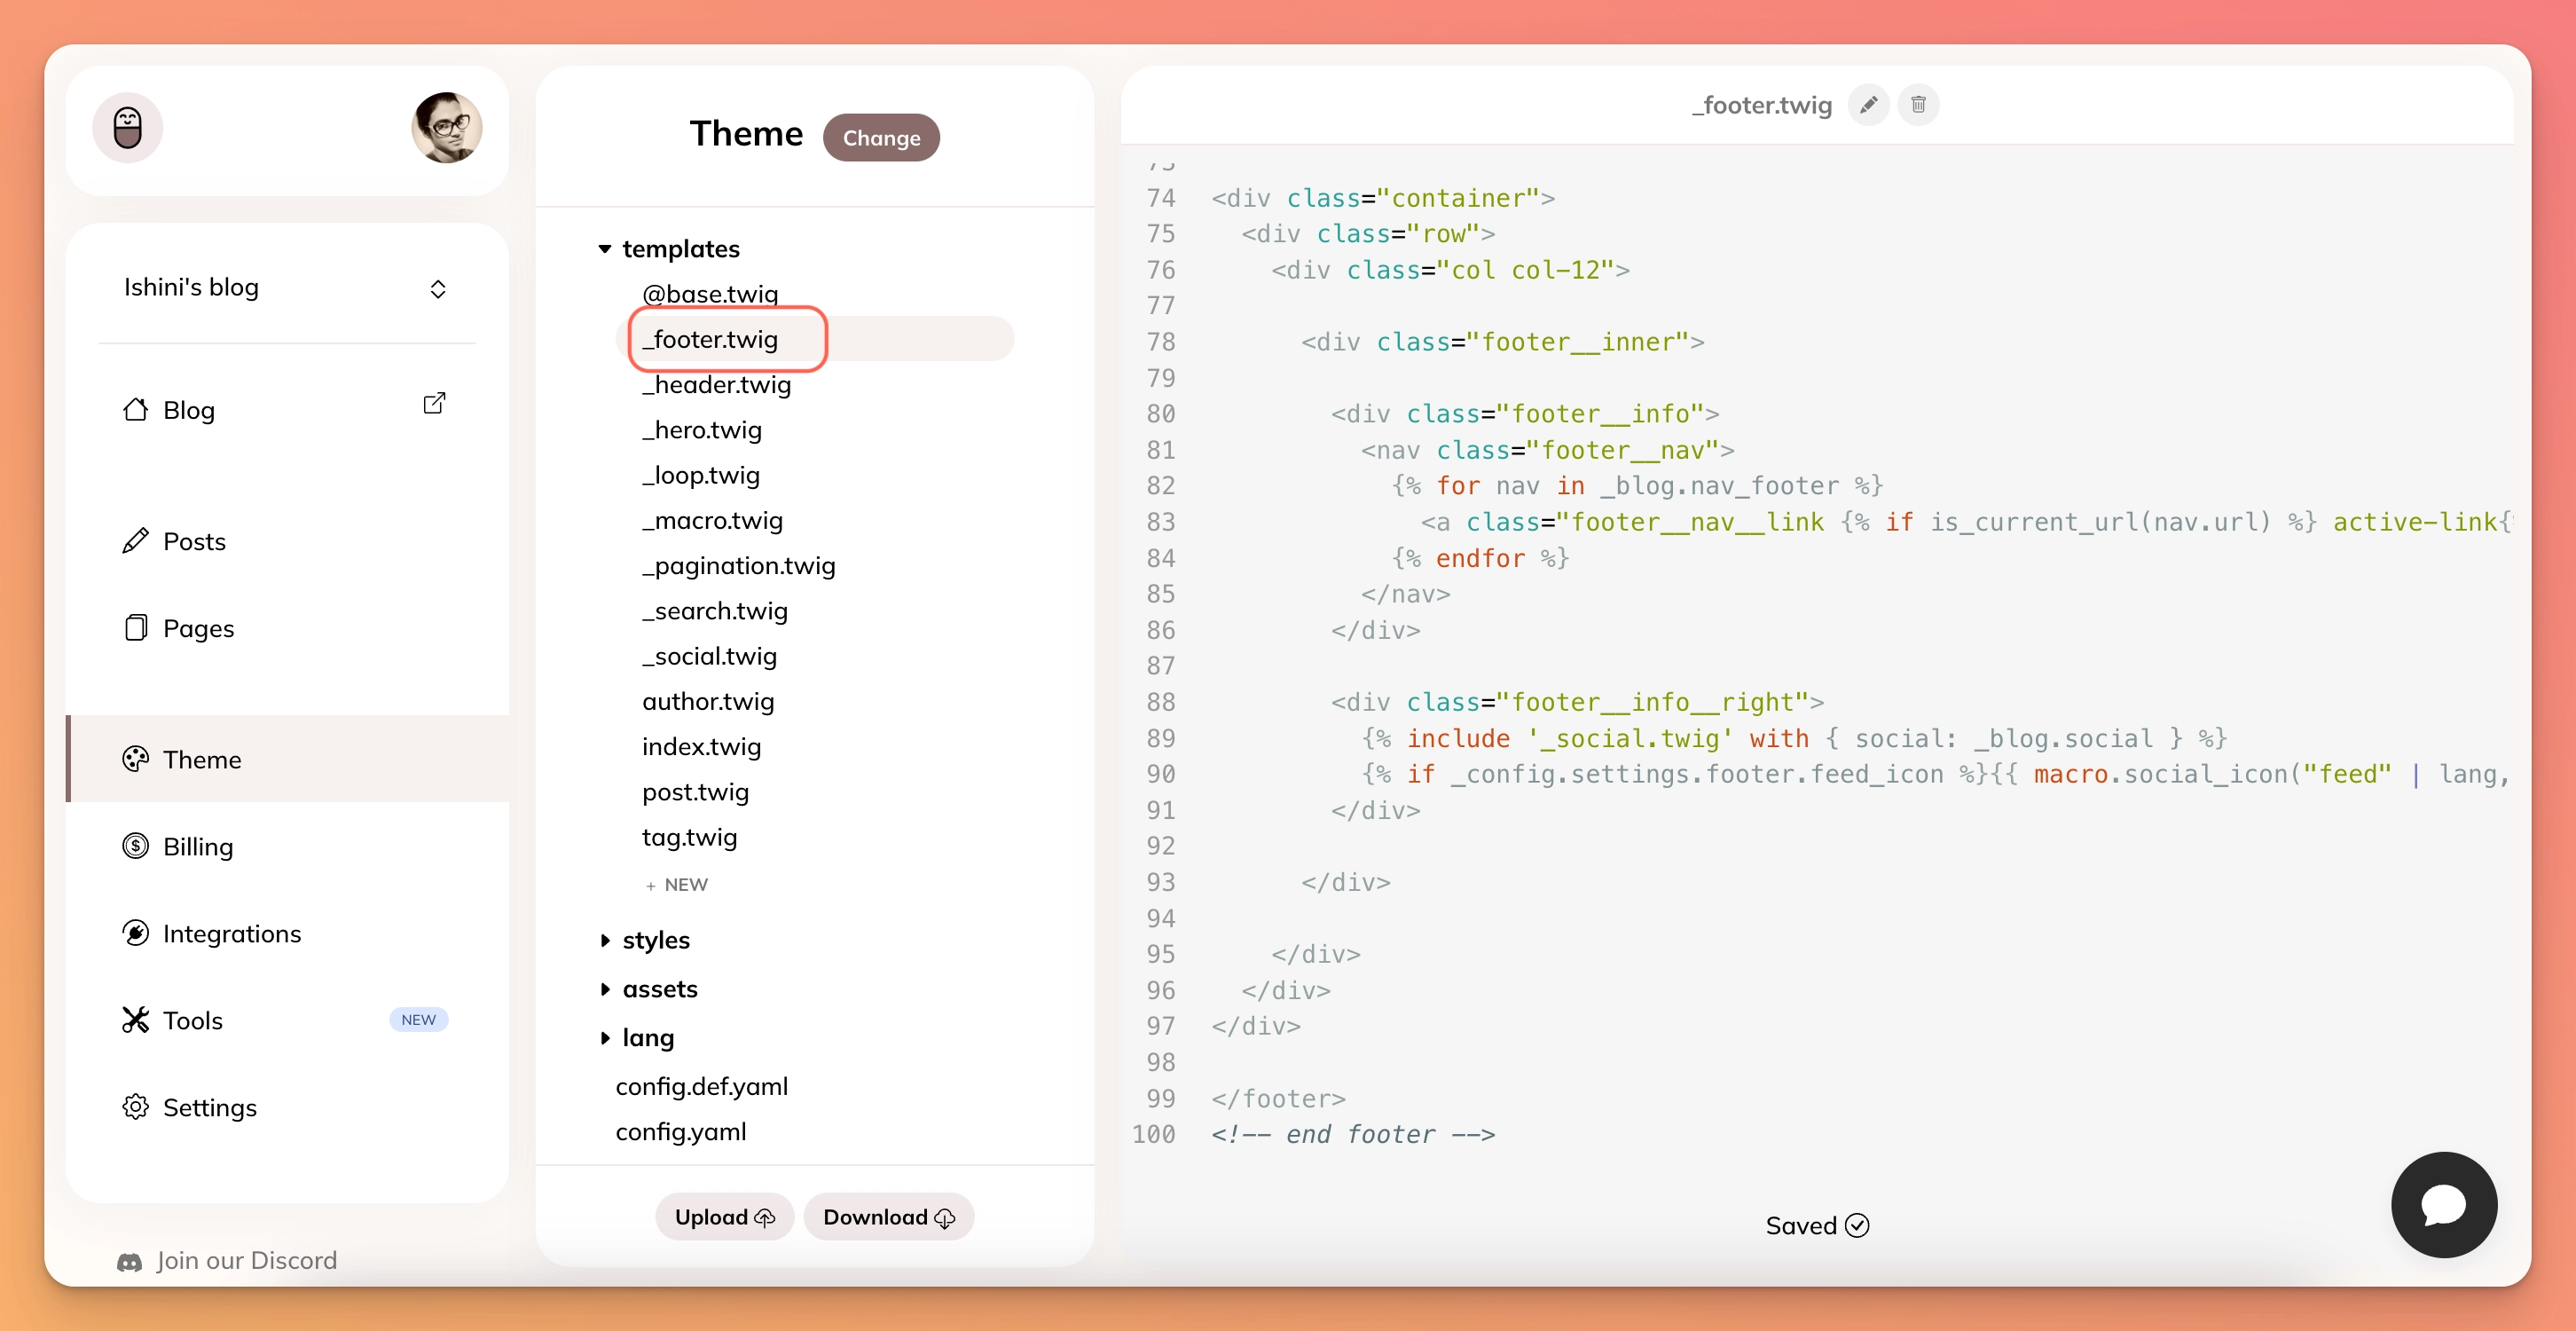 Go to Theme -> Templates -> _footer.twig